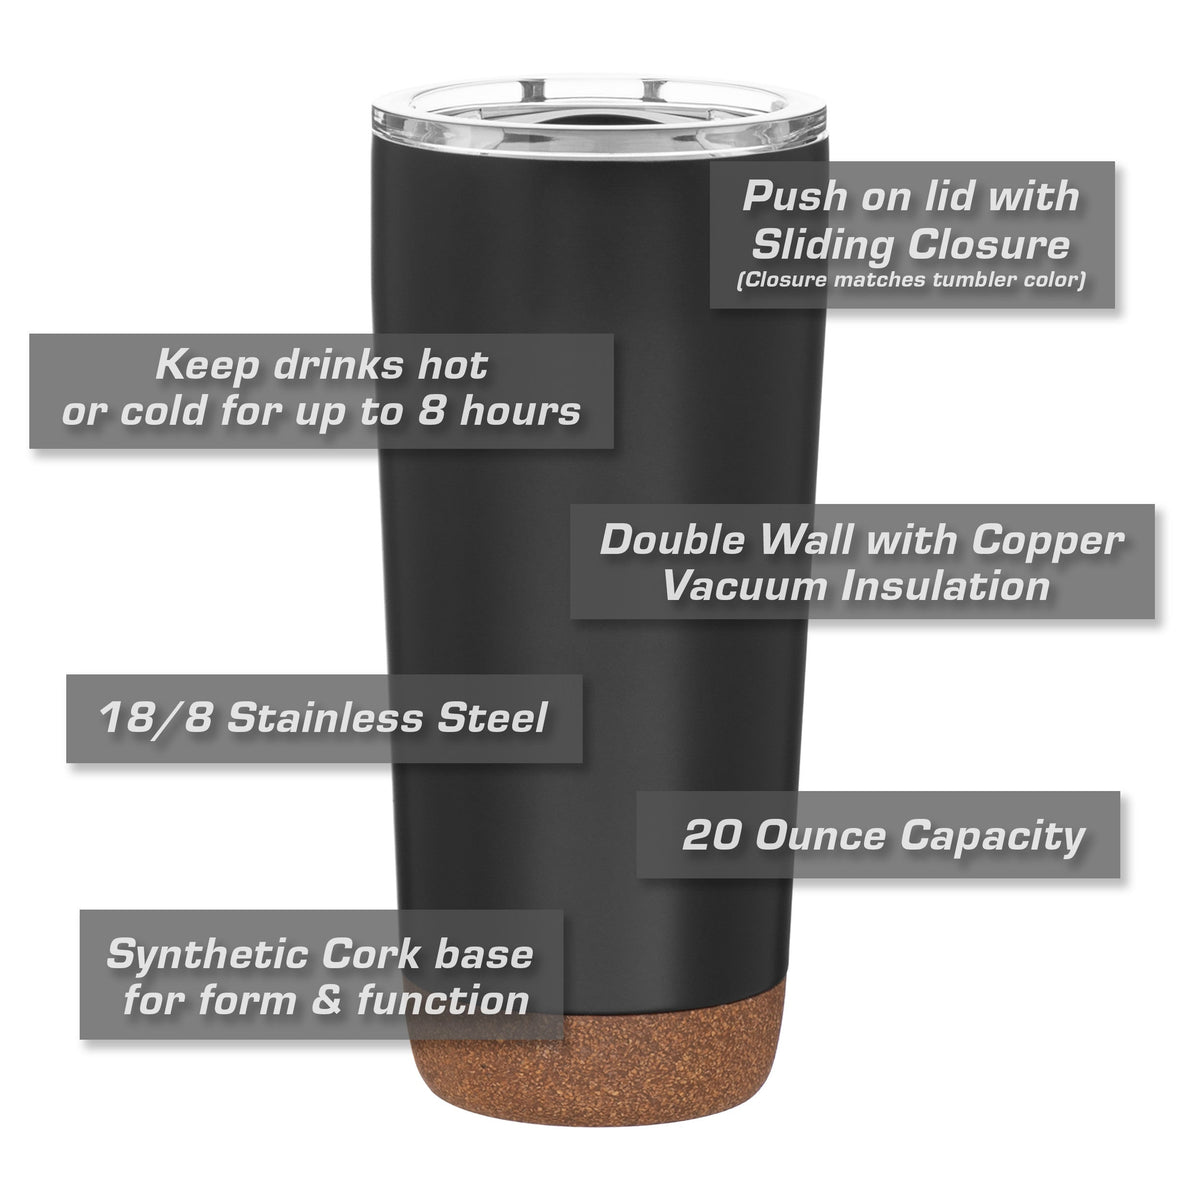 Acura NSX NC1 2021 Insulated Stainless Steel Coffee Tumbler - 20 oz